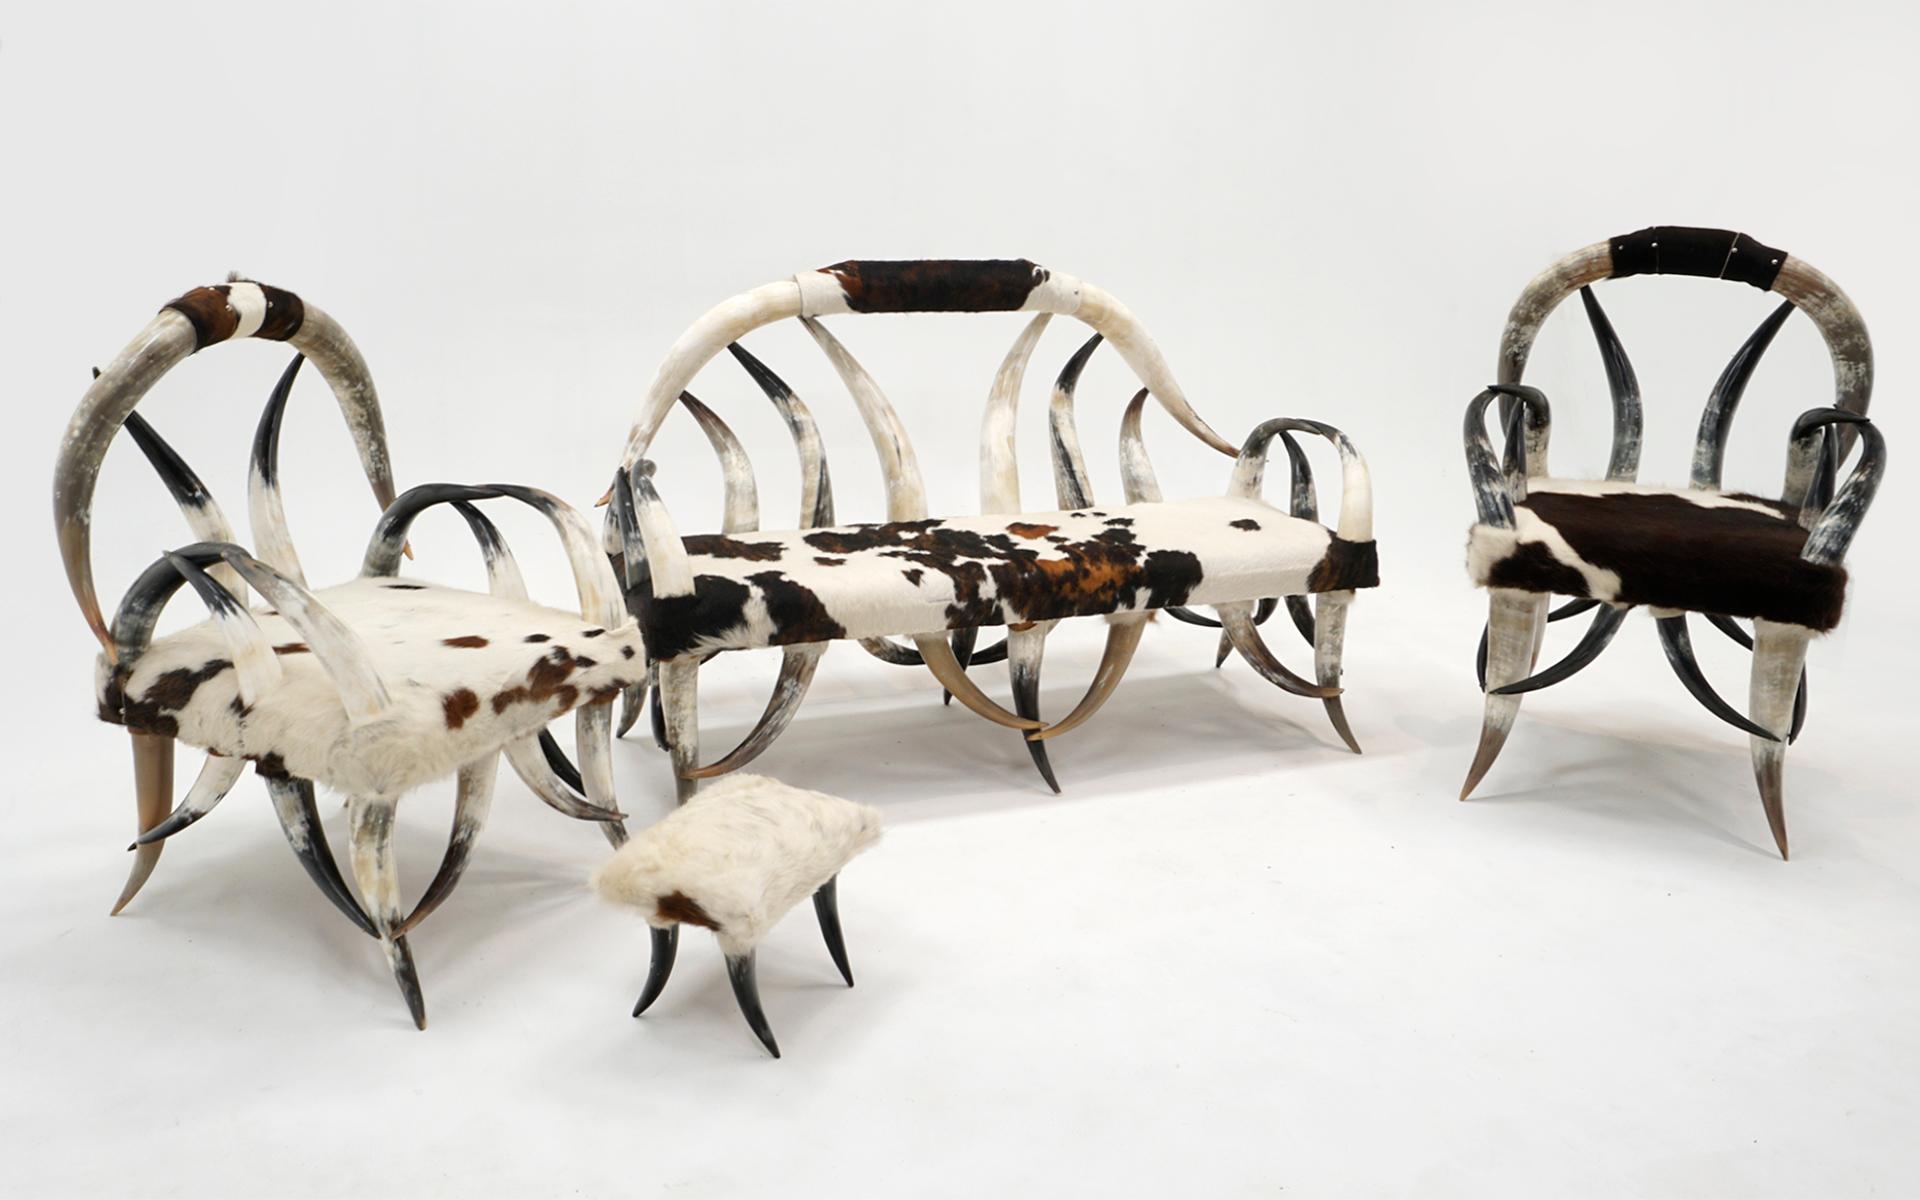 Rustic Steer Horn Sofa, Two Chairs & Ottoman, Black, Brown & White Cowhide Upholstery  For Sale